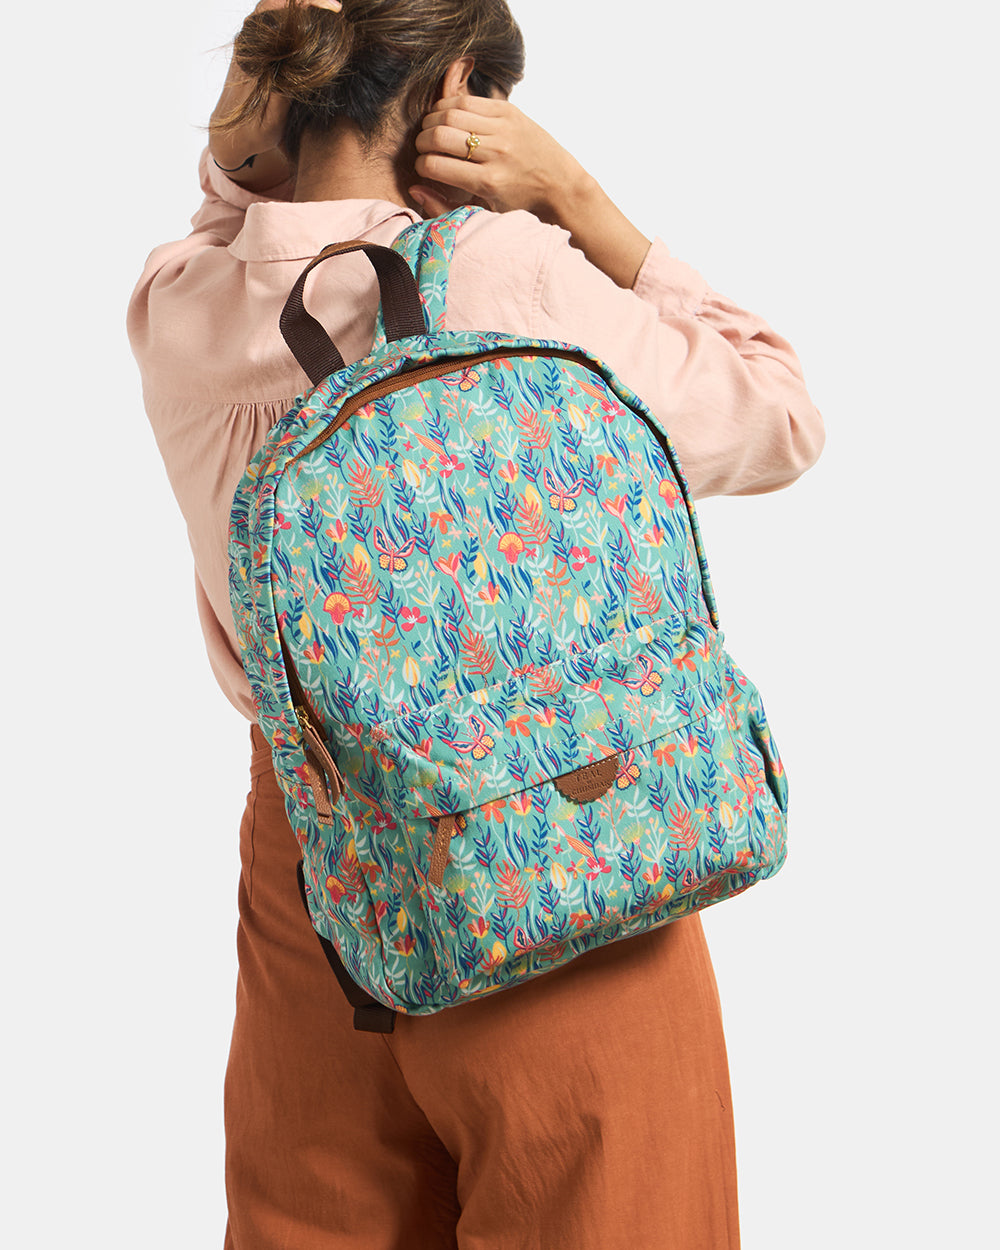 Teal by Chumbak |Tokyo Blooms Backpack